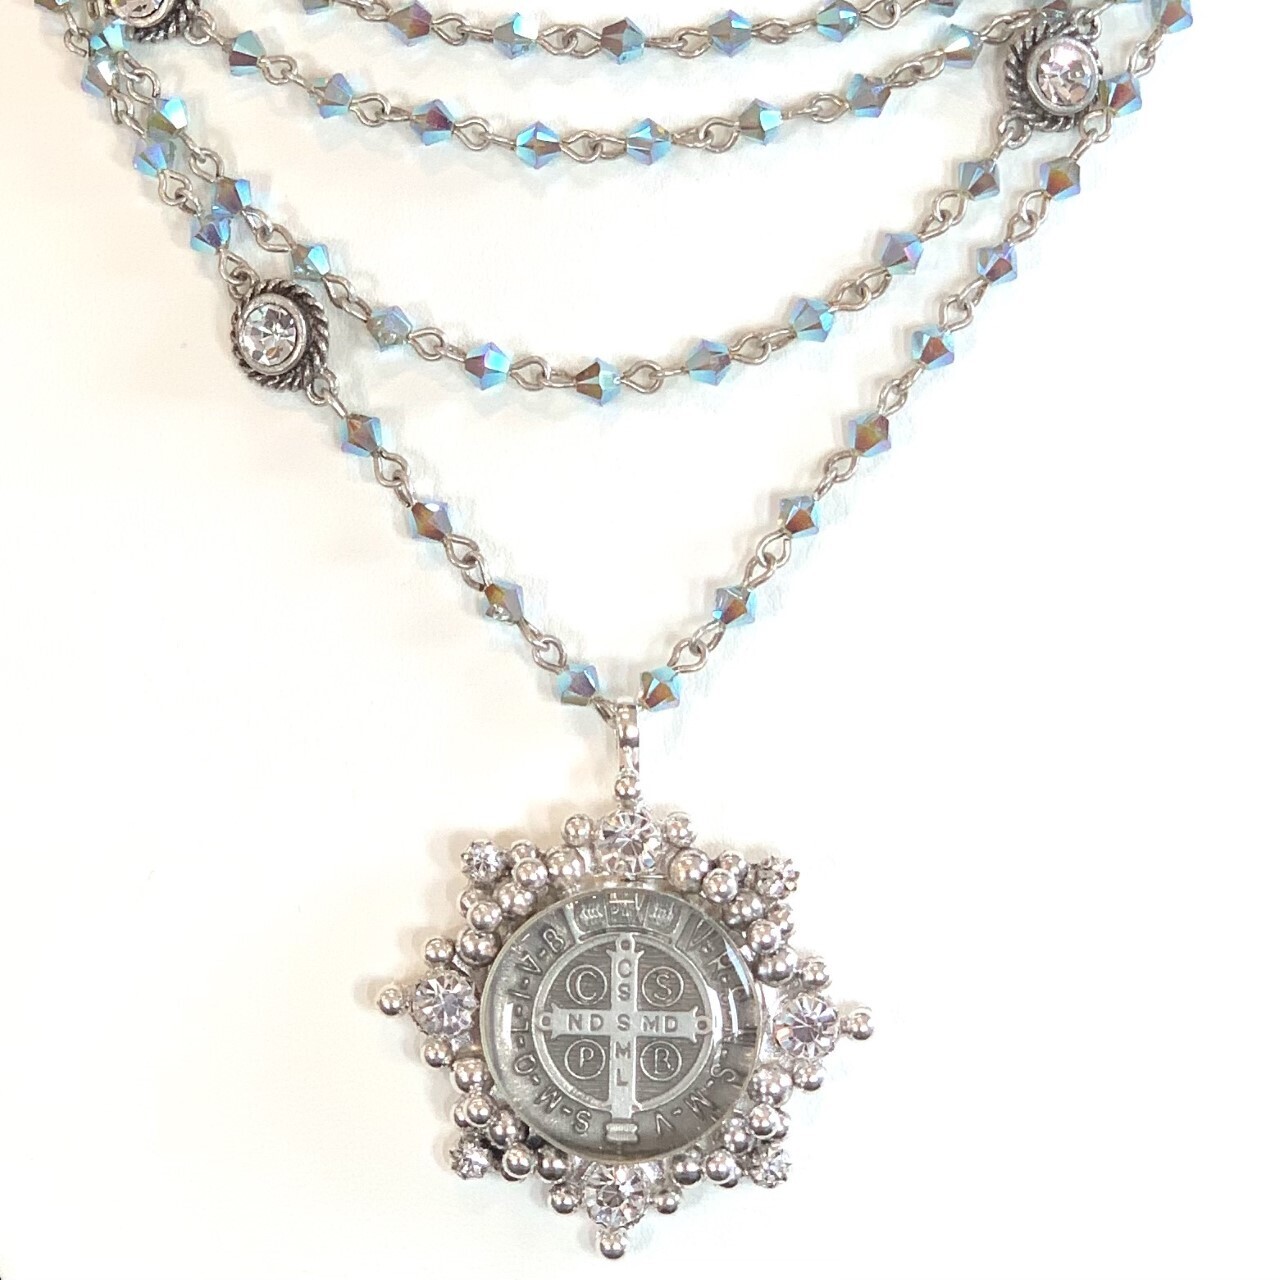 VSA Magdalena Necklace in Pacific Opal AB (Silver)